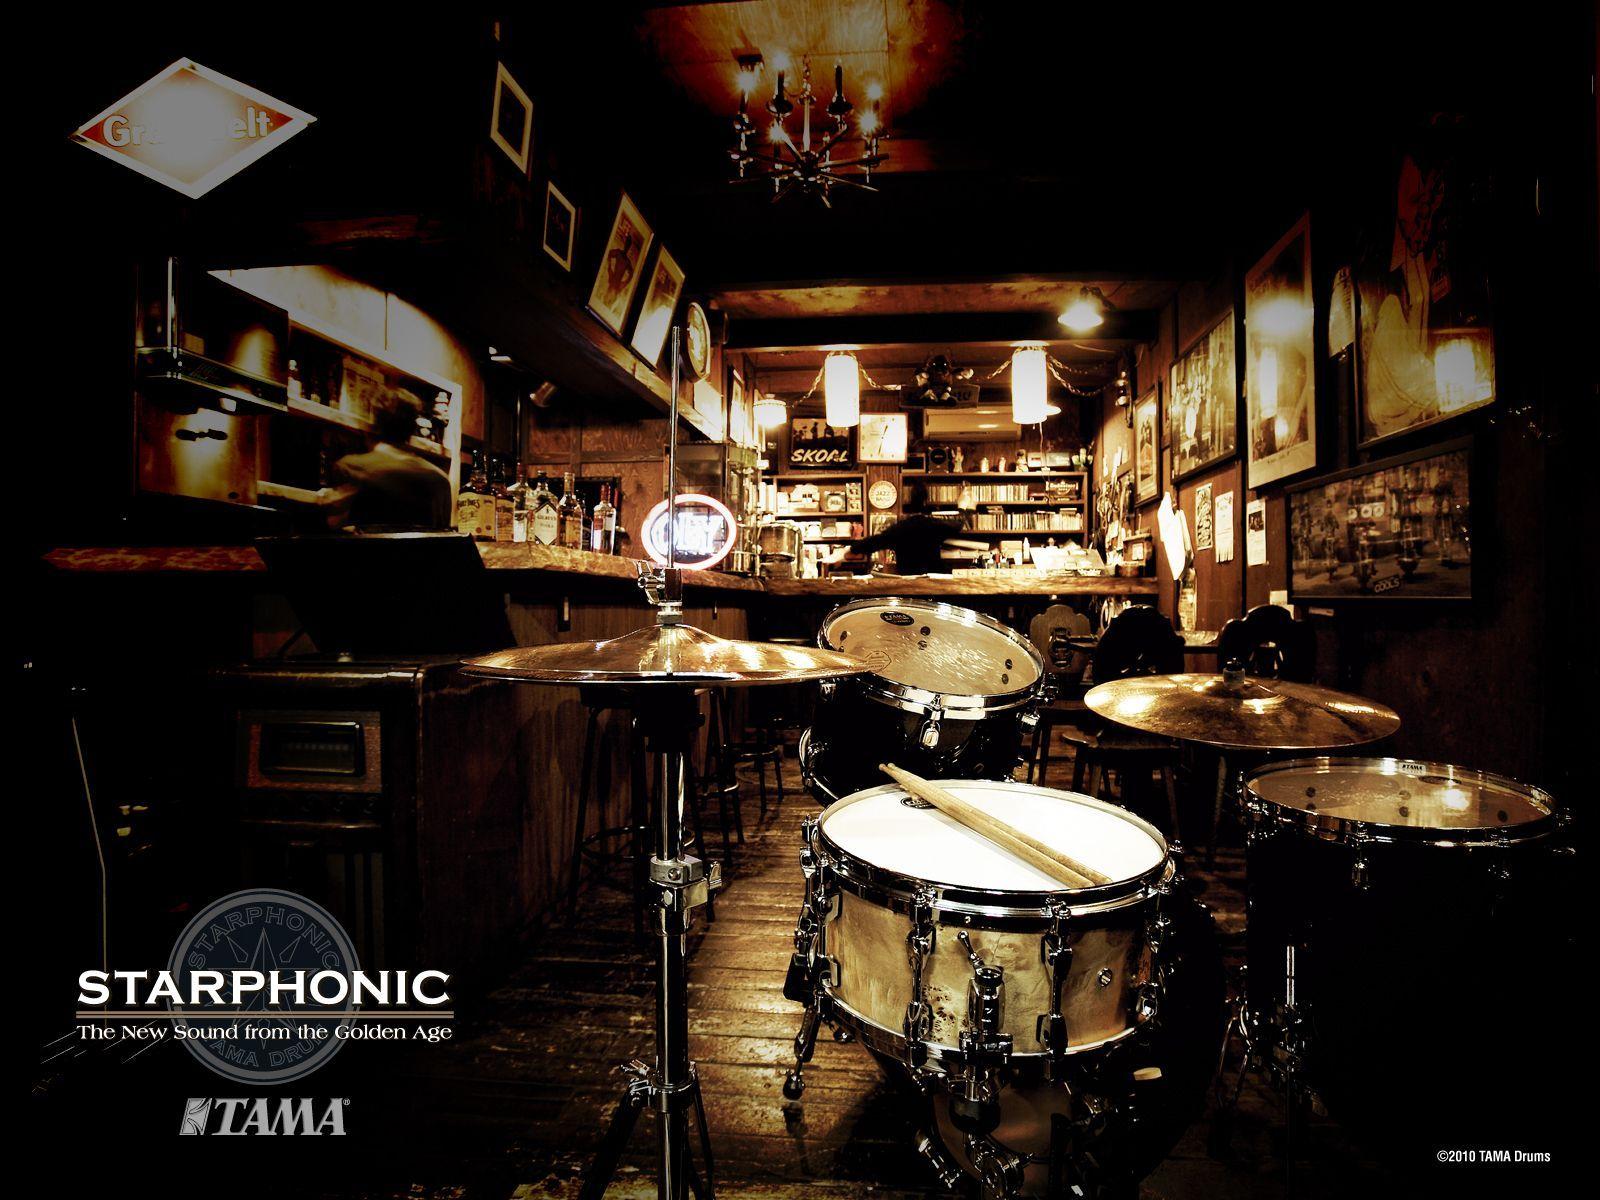 Whisky e Starphonic a gogò!. Drums. Whisky, Drums